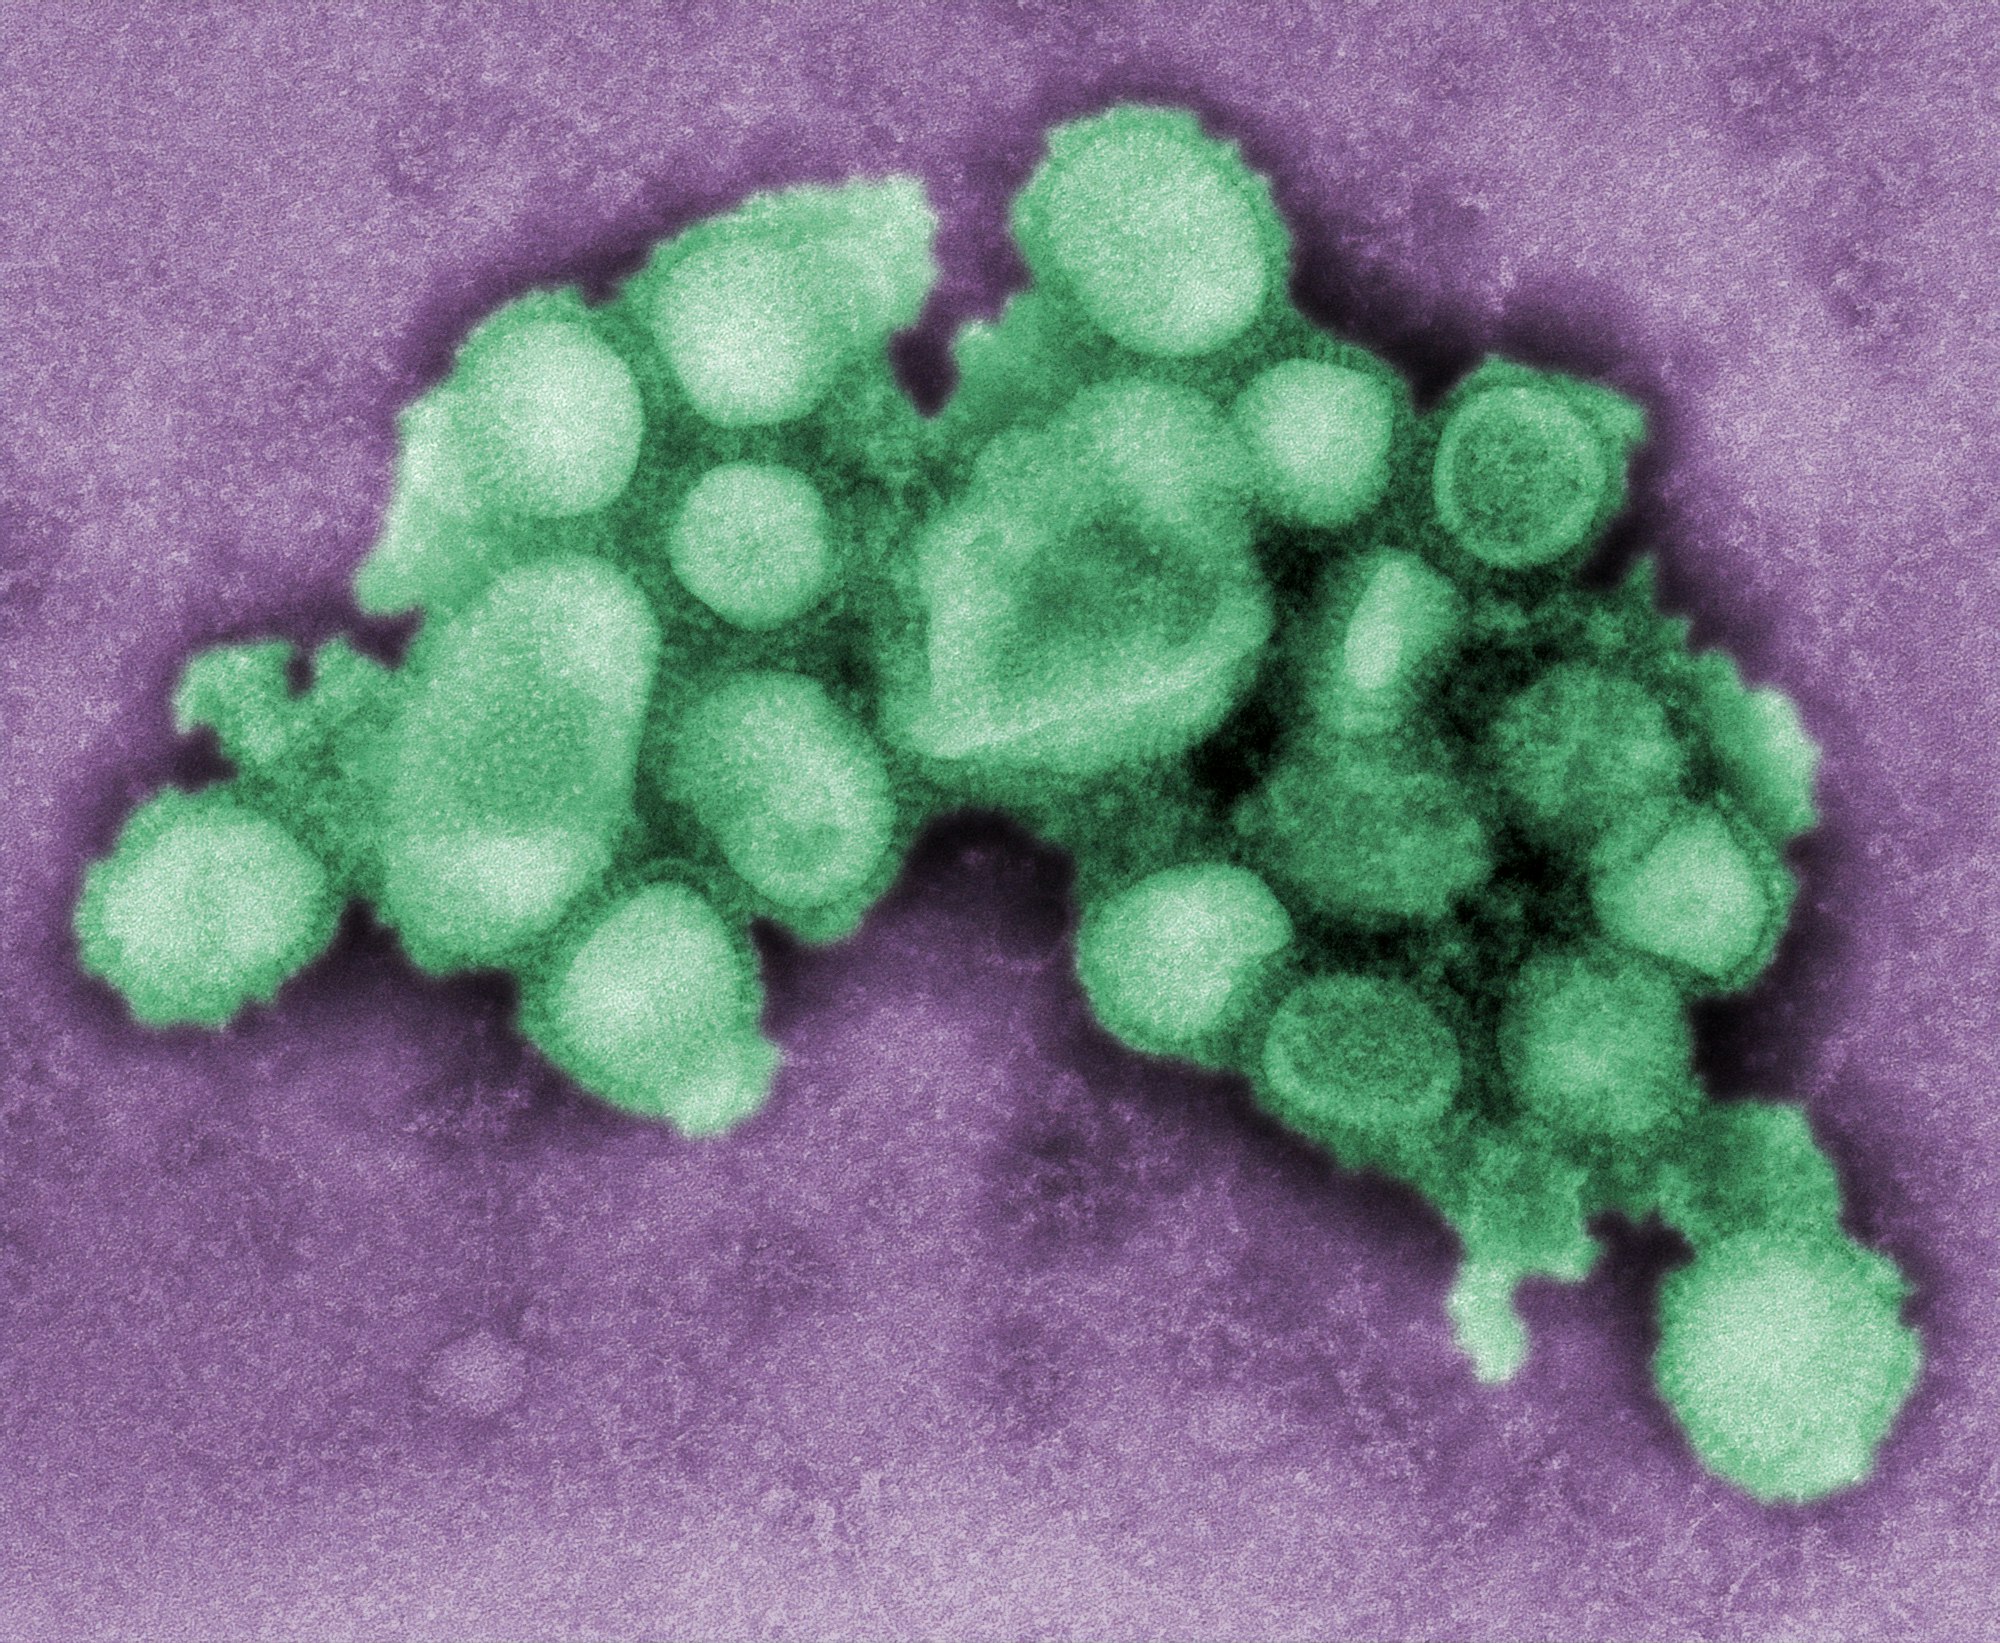 This digitally-colorized, negative-stained transmission electron microscopic (TEM) image depicted some of the ultrastructural morphology of the A/CA/4/09 Swine Flu virus.